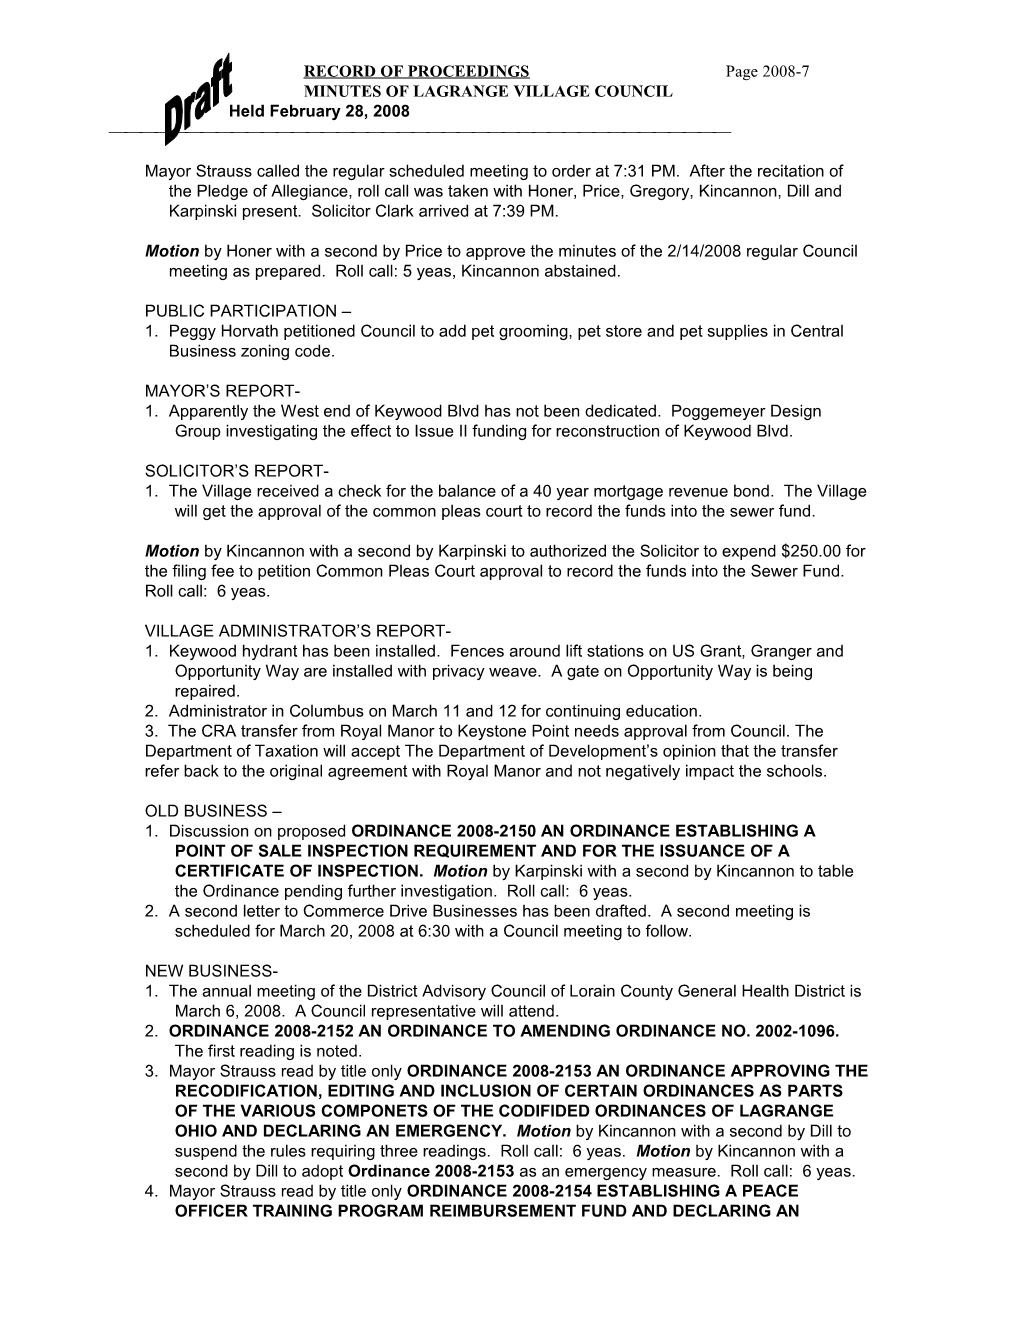 RECORD of PROCEEDINGS Page 2008-7 MINUTES of LAGRANGE VILLAGE COUNCIL